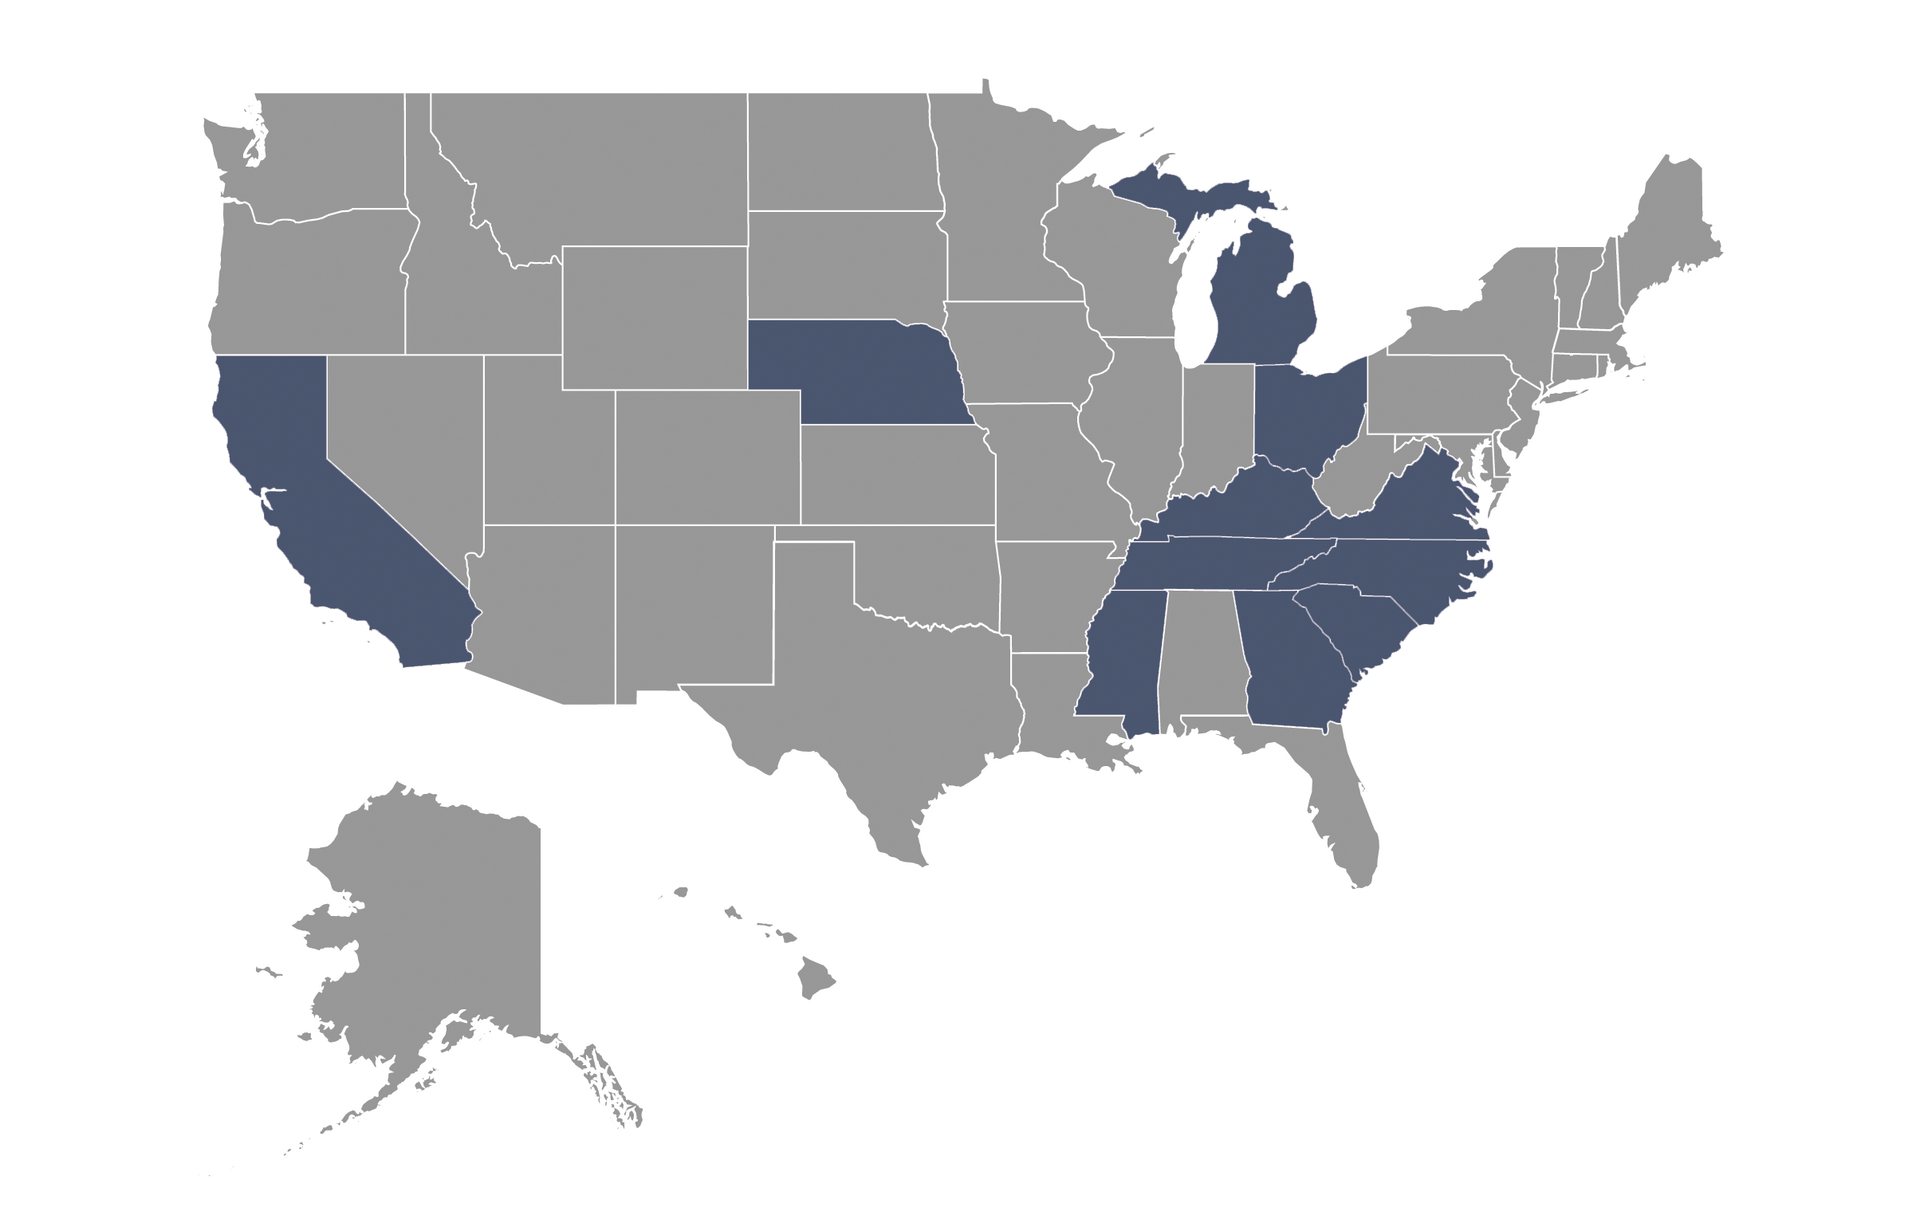 USA statewide map with highlighted states served